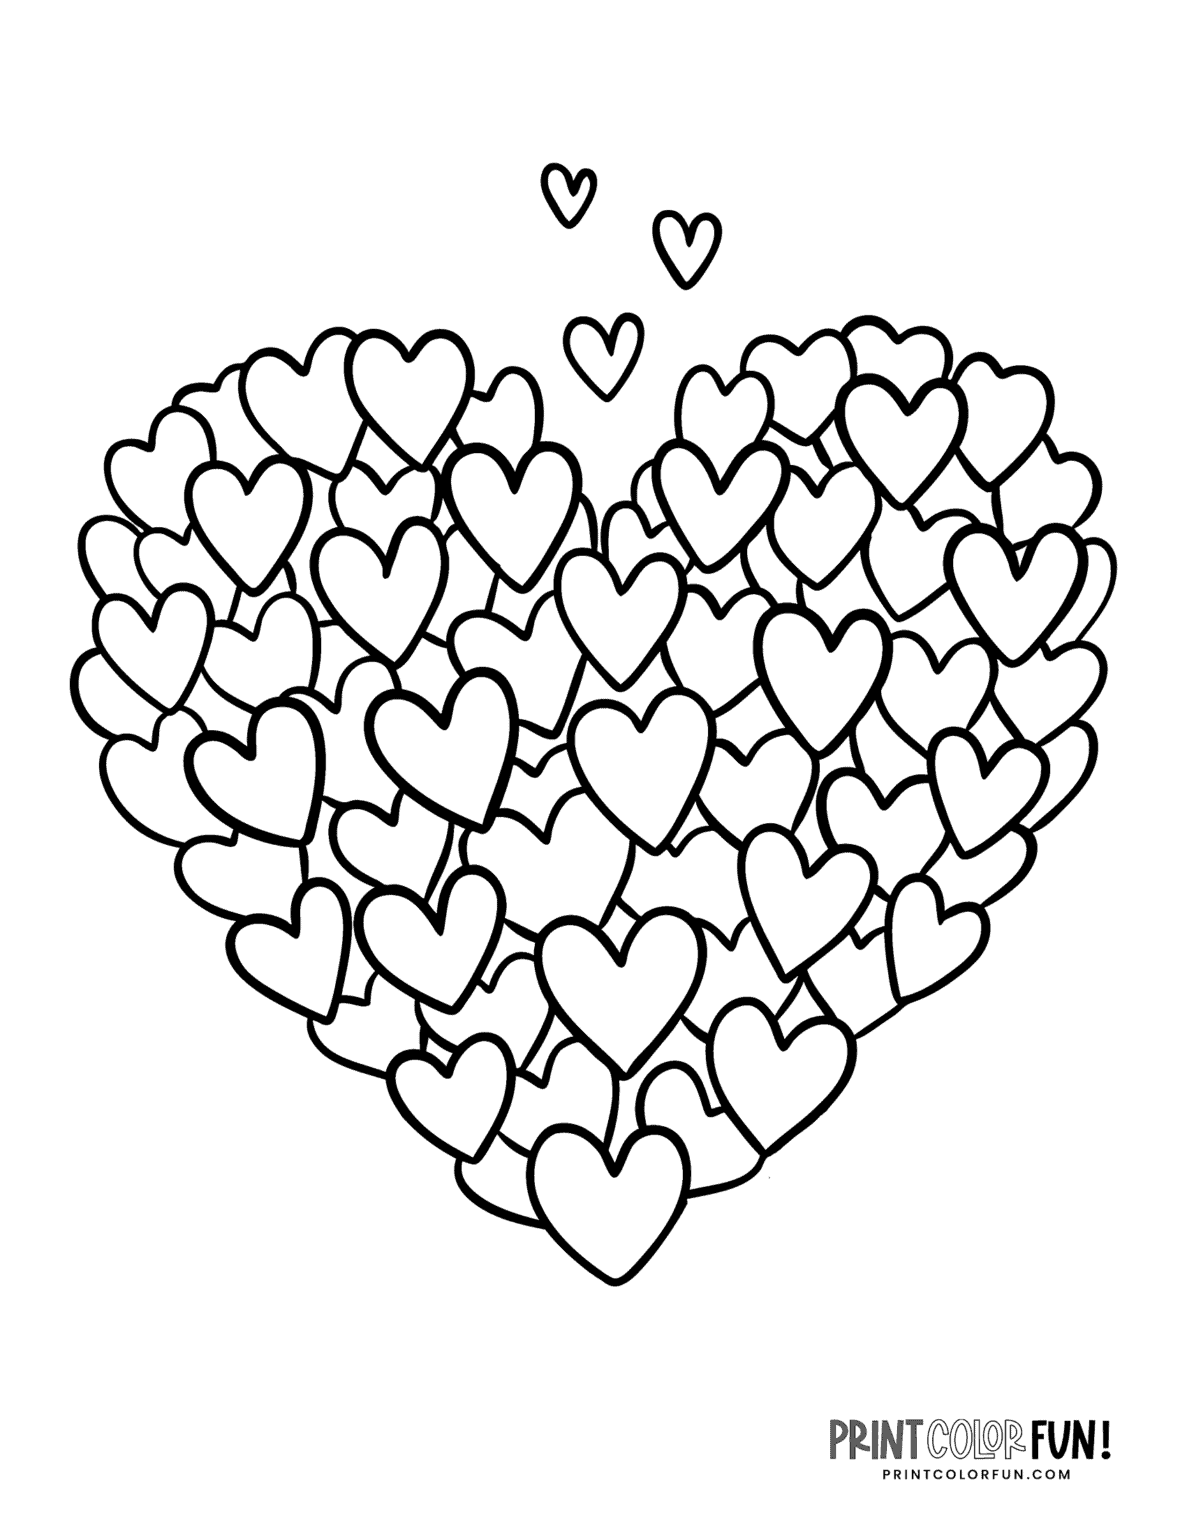 100-printable-heart-coloring-pages-a-huge-collection-of-hearts-for